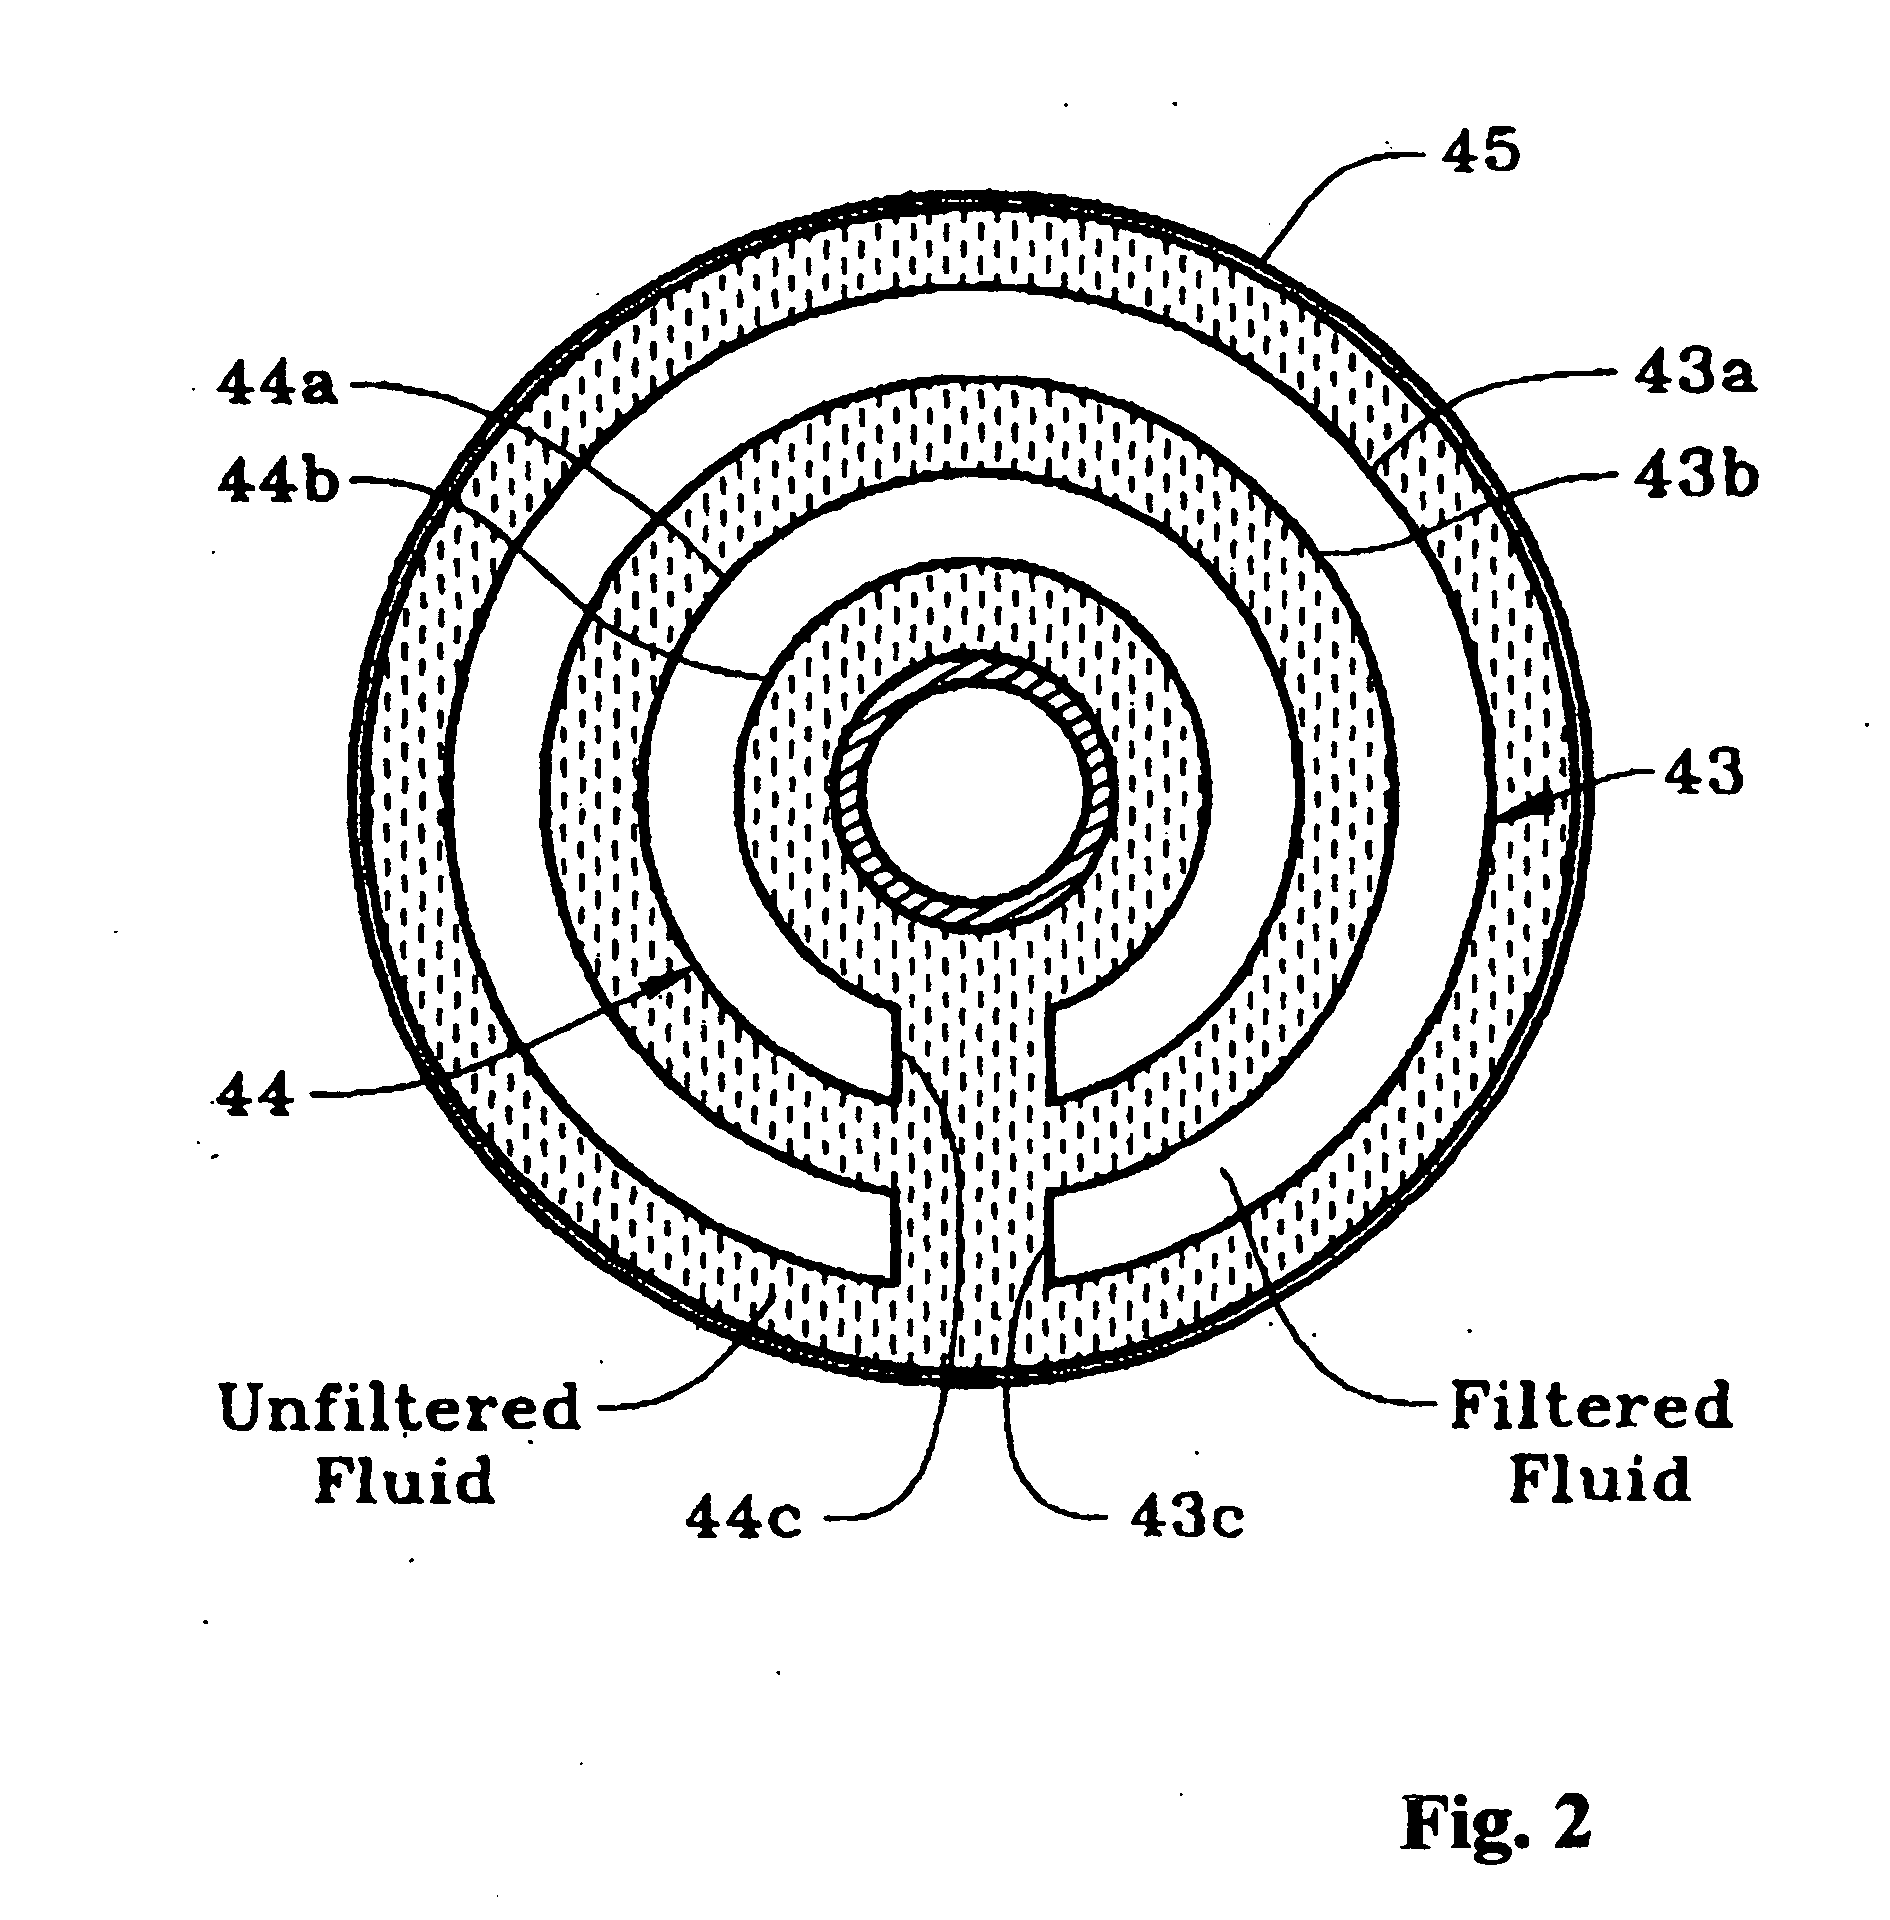 Filter having opposing parallel planes of wedge wires